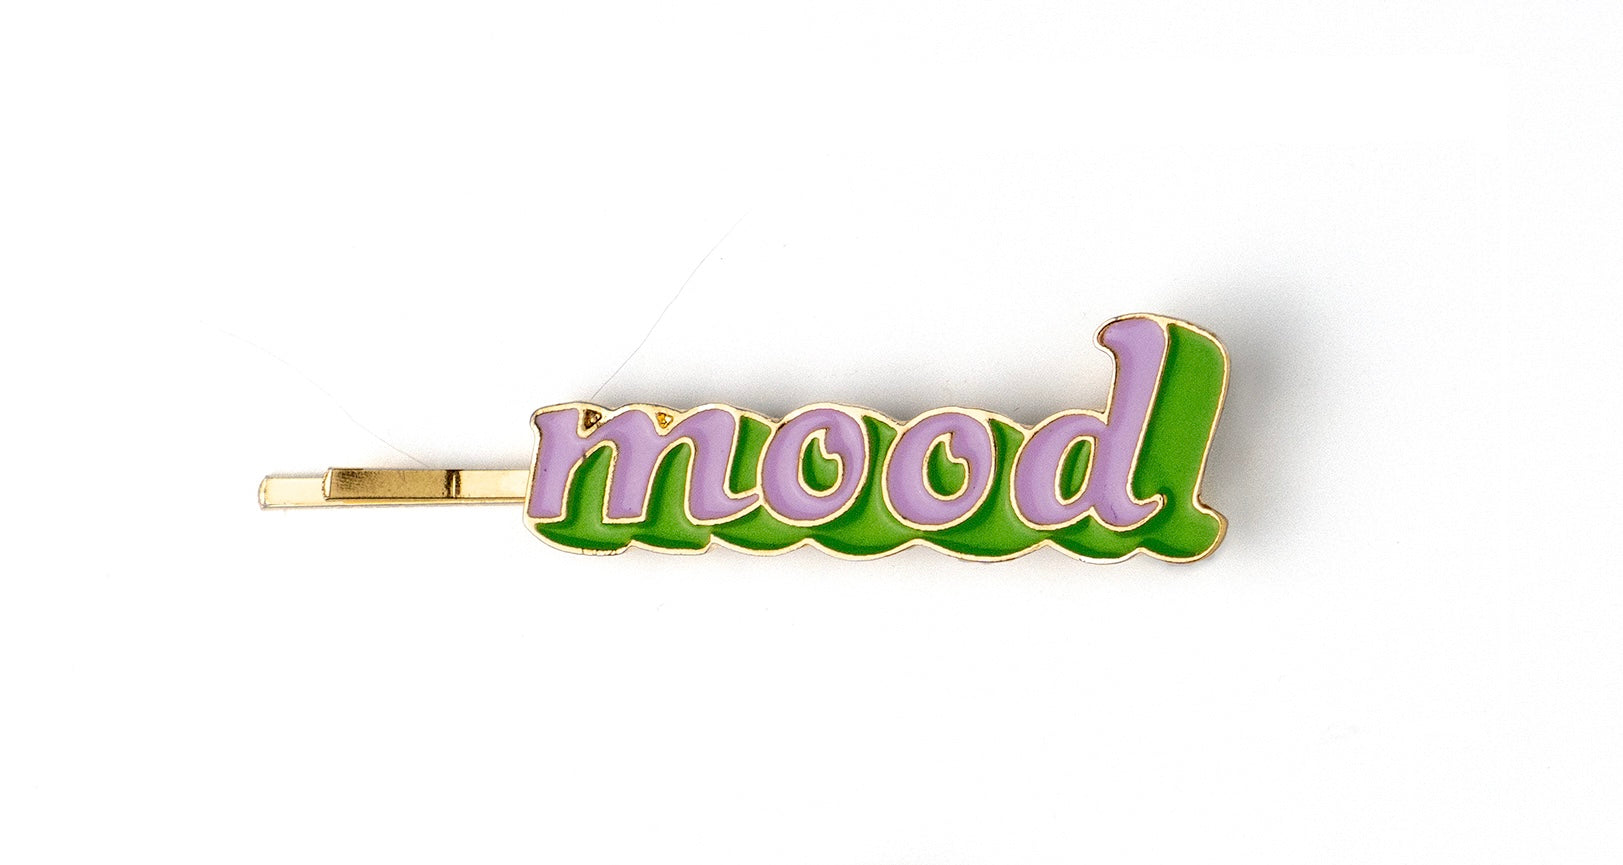 Olivia Moss® Message Received Enamel Bobby Pins | Good -- Mood